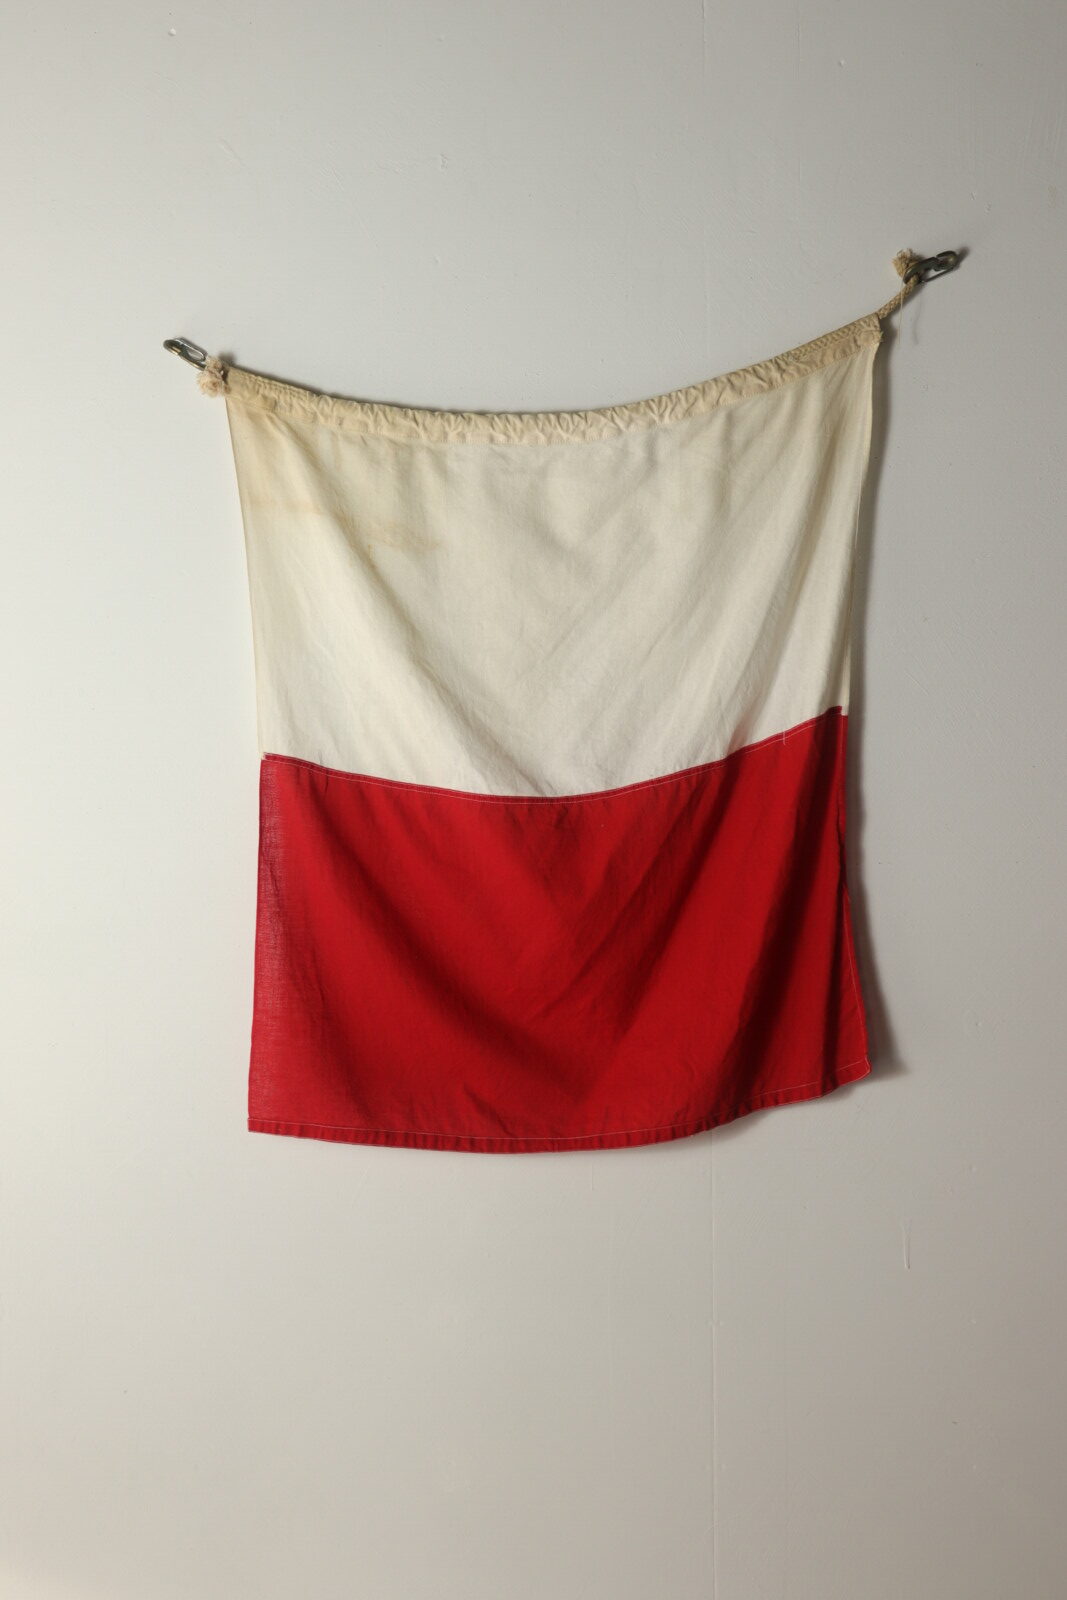 1940's,vintage,cotton code flag,H,USA,Italy